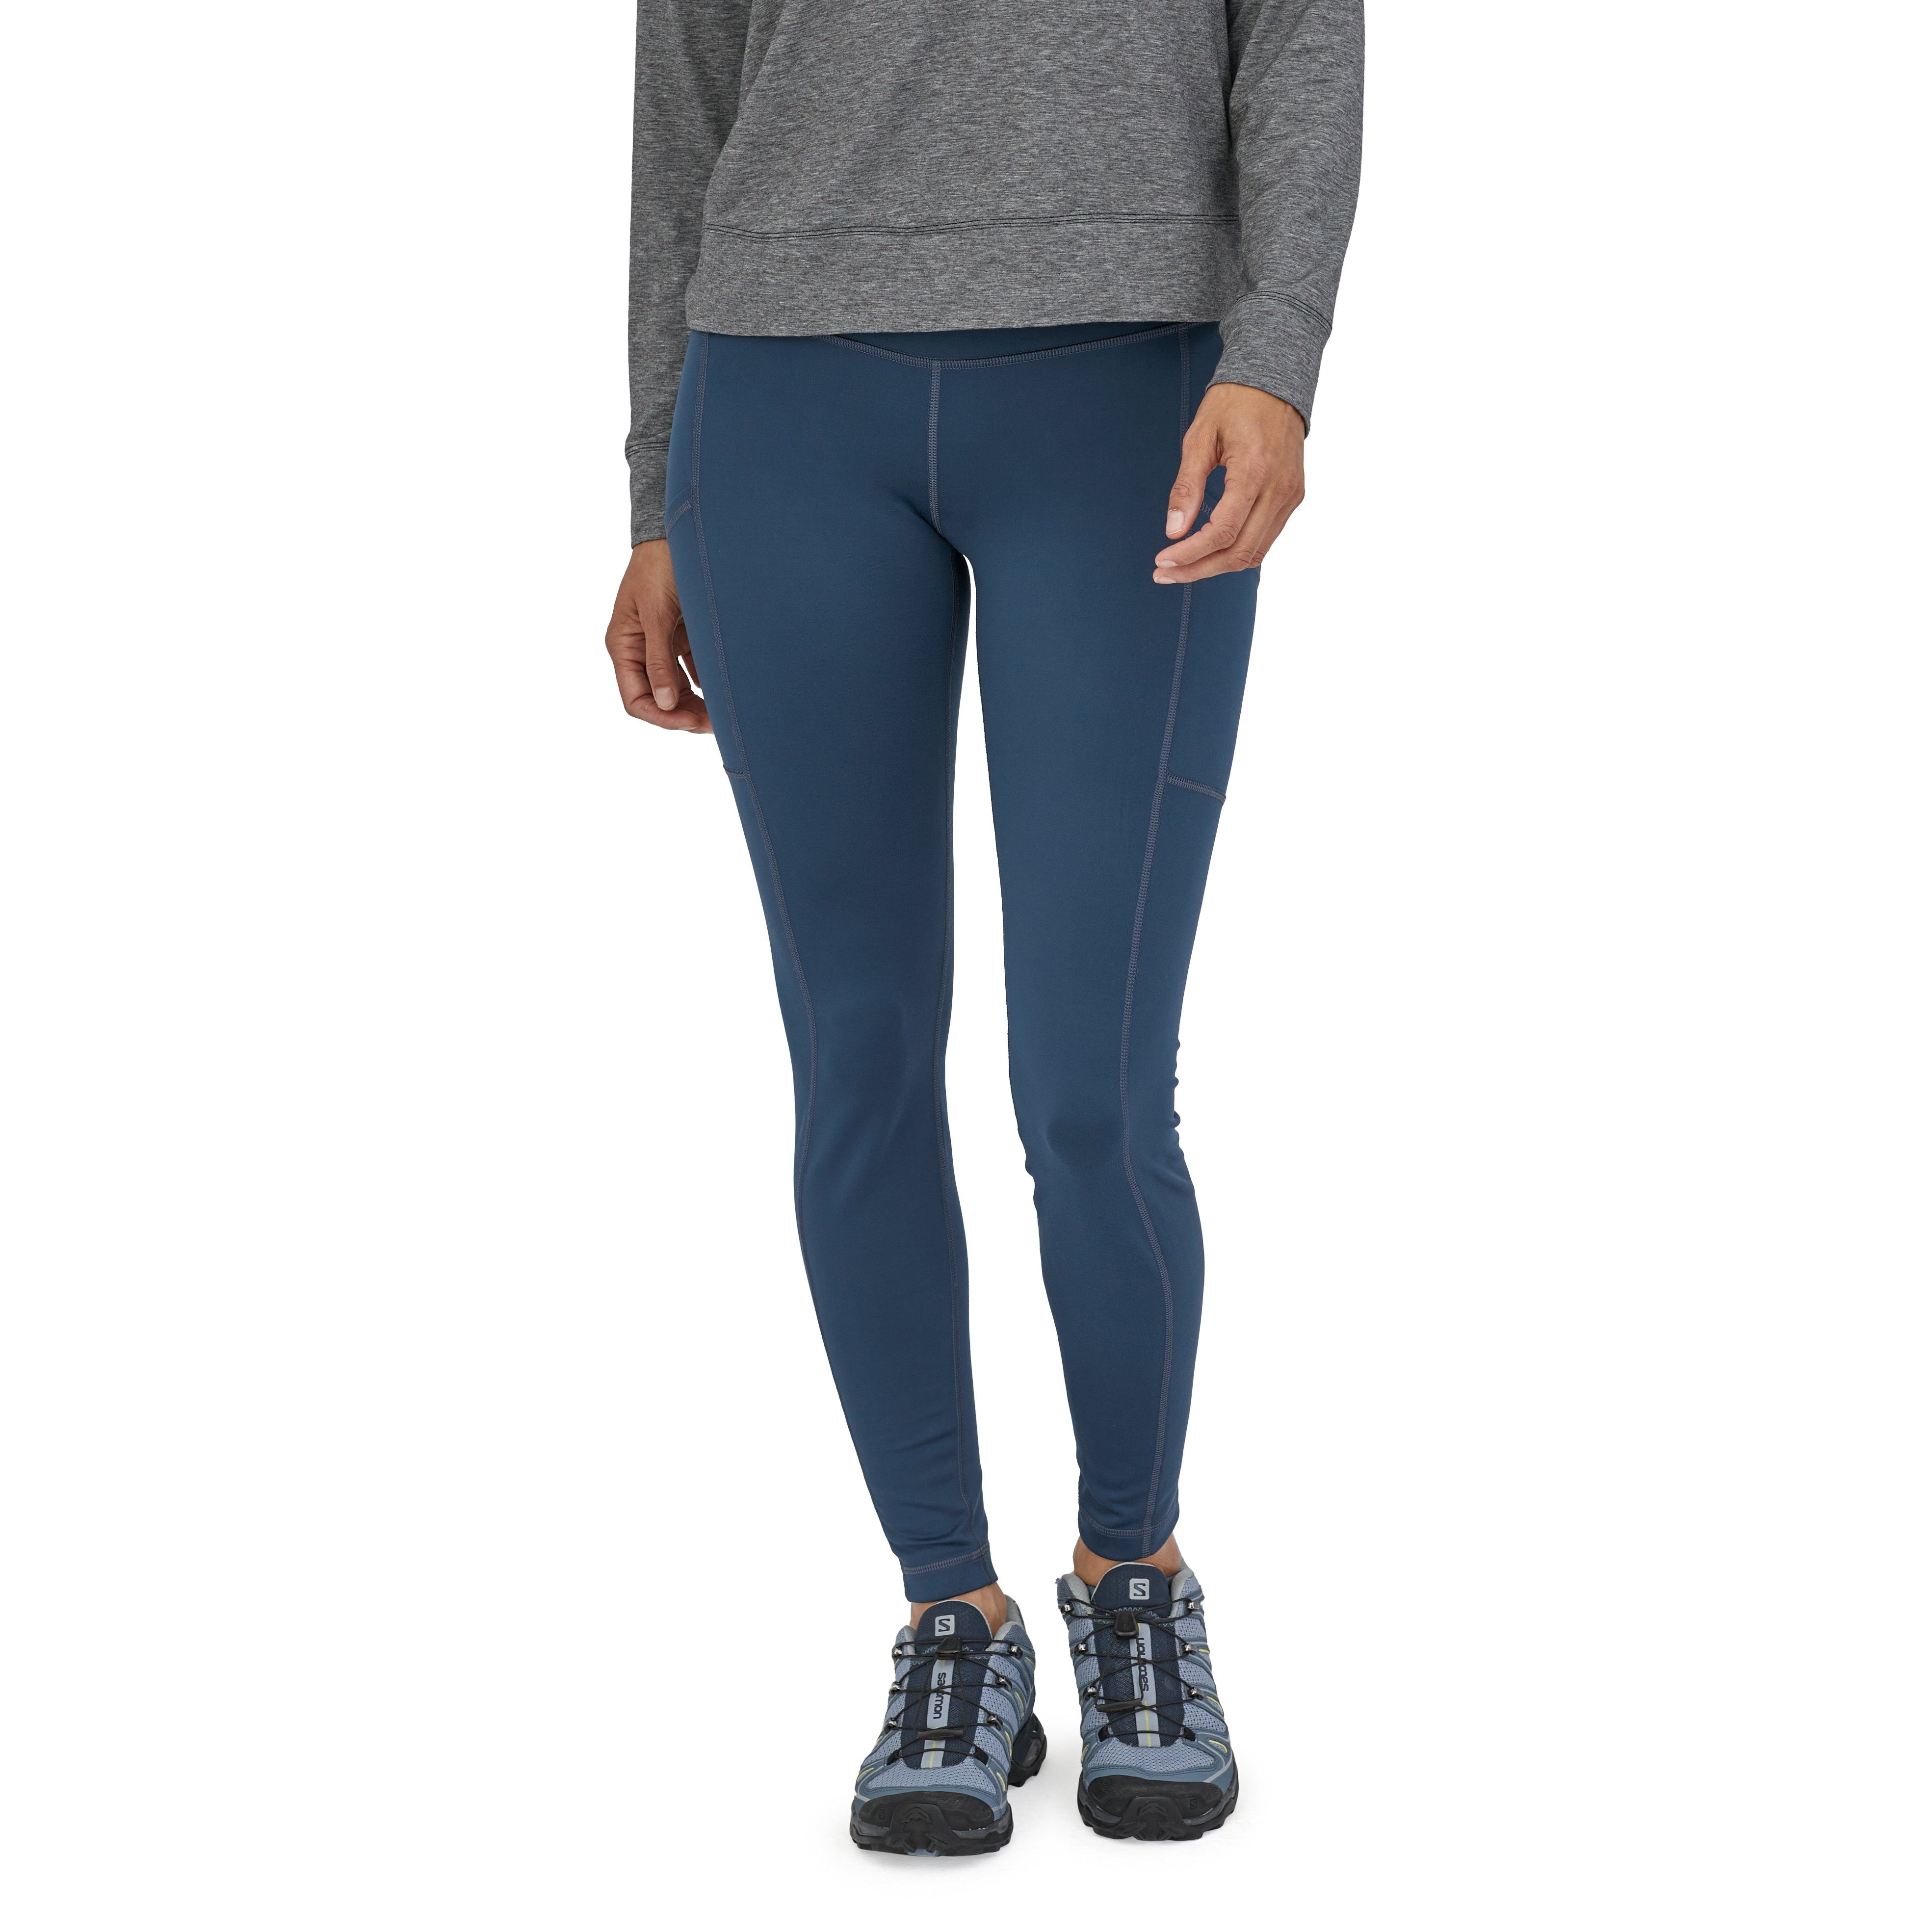 Patagonia Women's Pack Out Tights, Tidepool Blue / S